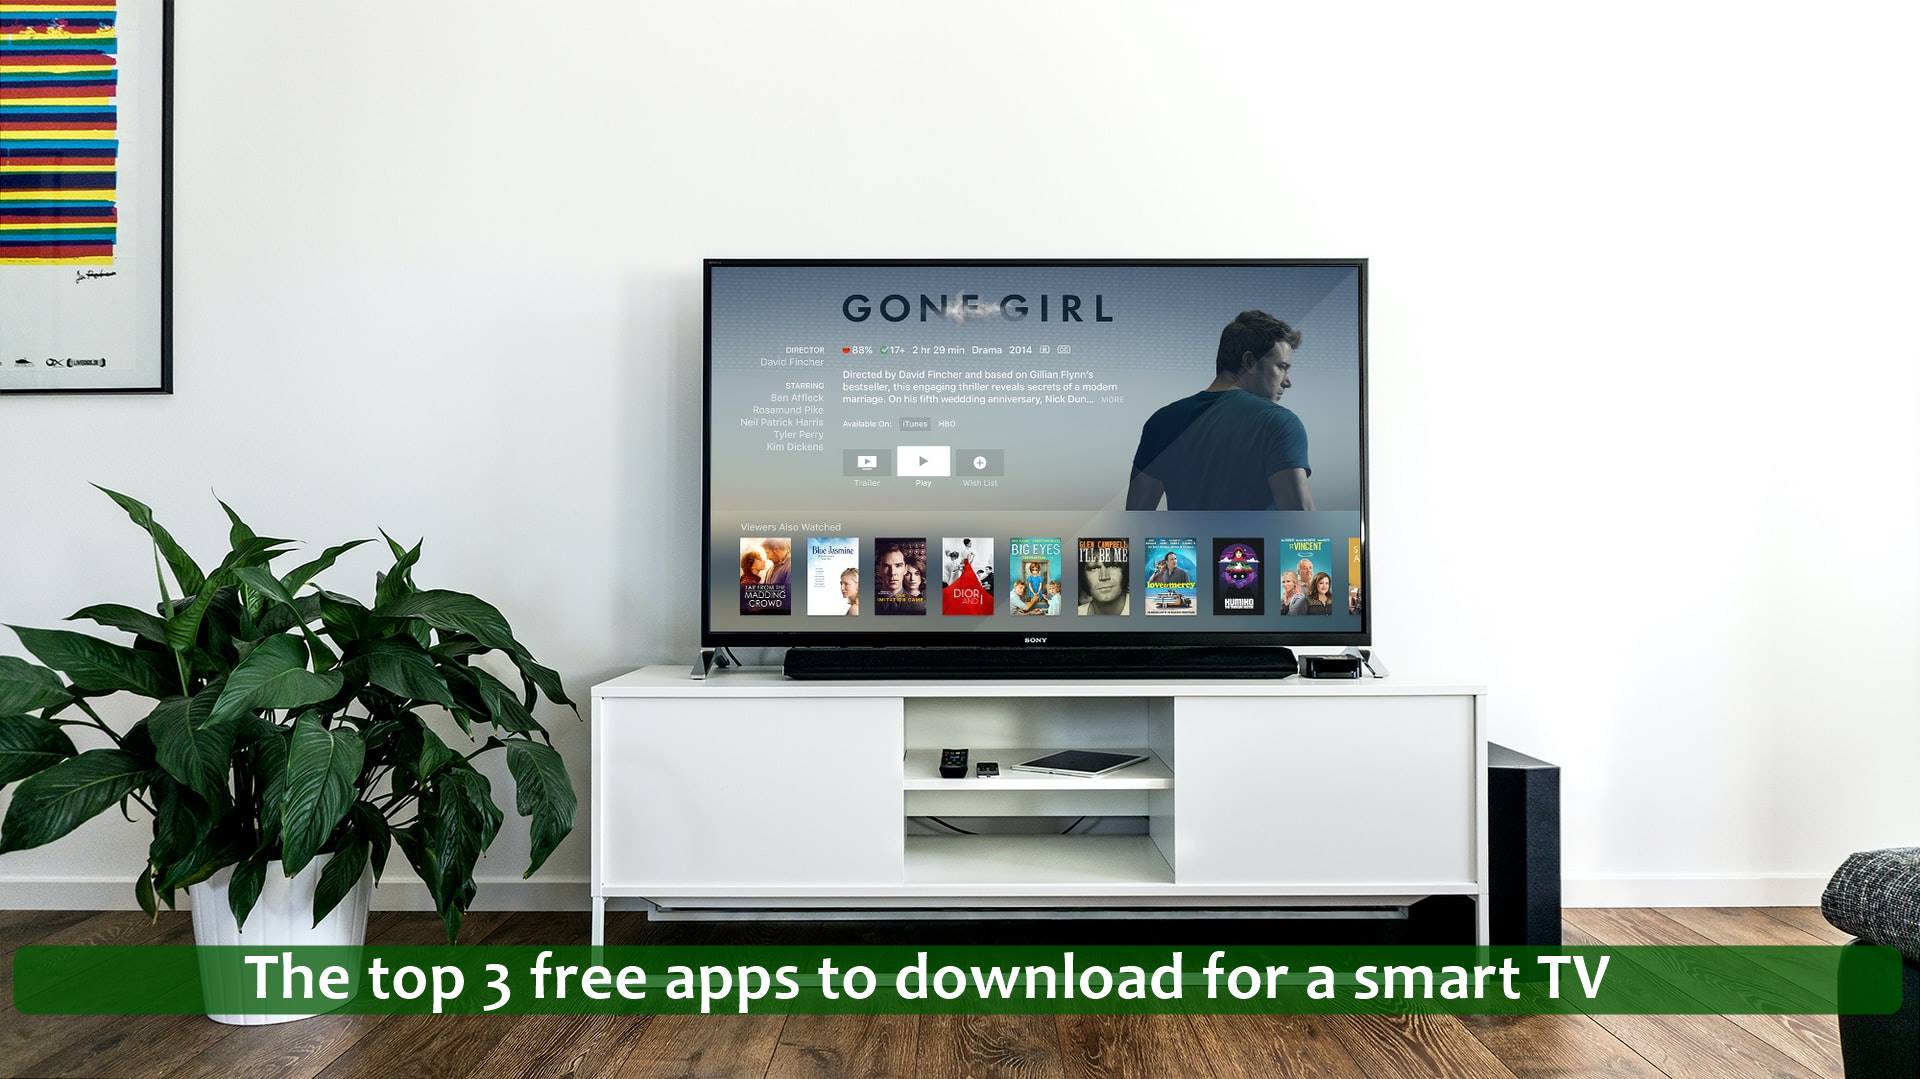 The top 3 free apps to download for a smart TV